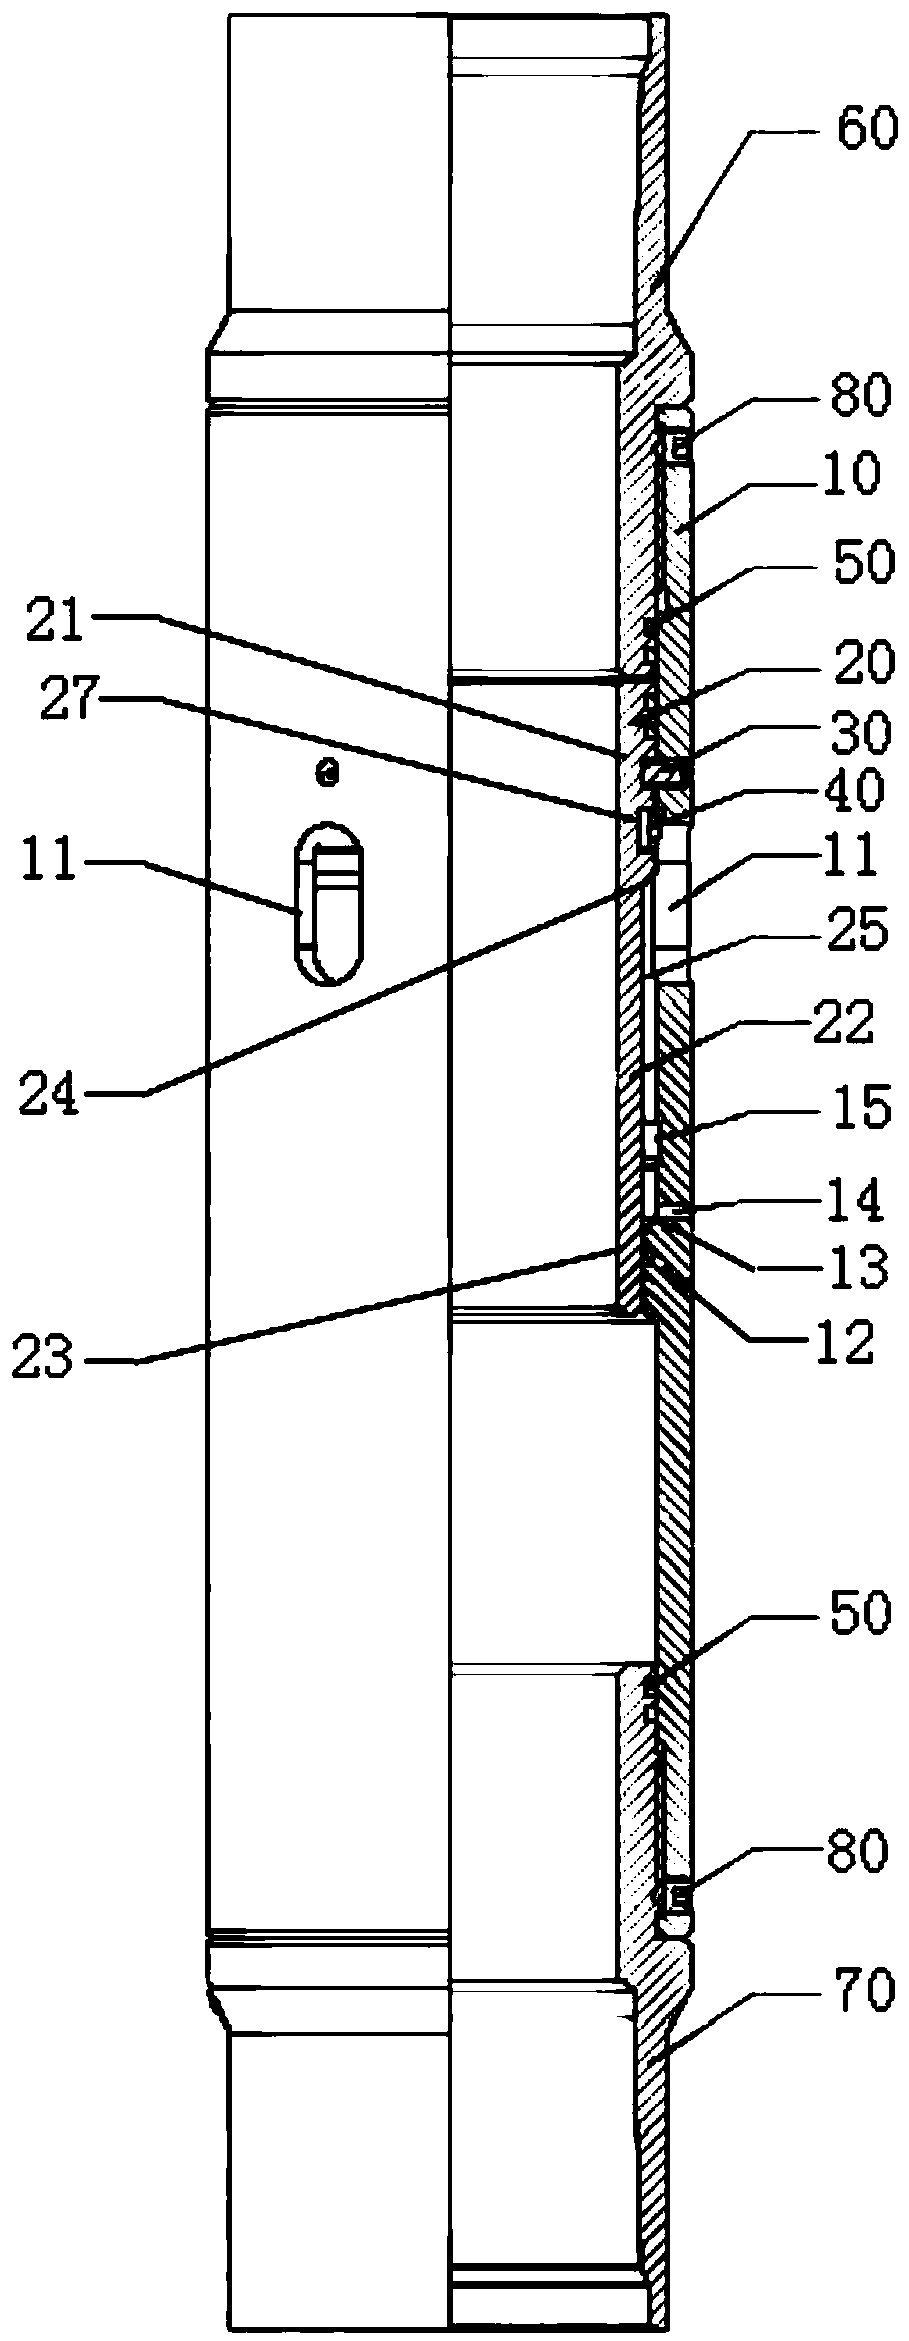 Open-hole segmental fracturing differential pressure sliding sleeve